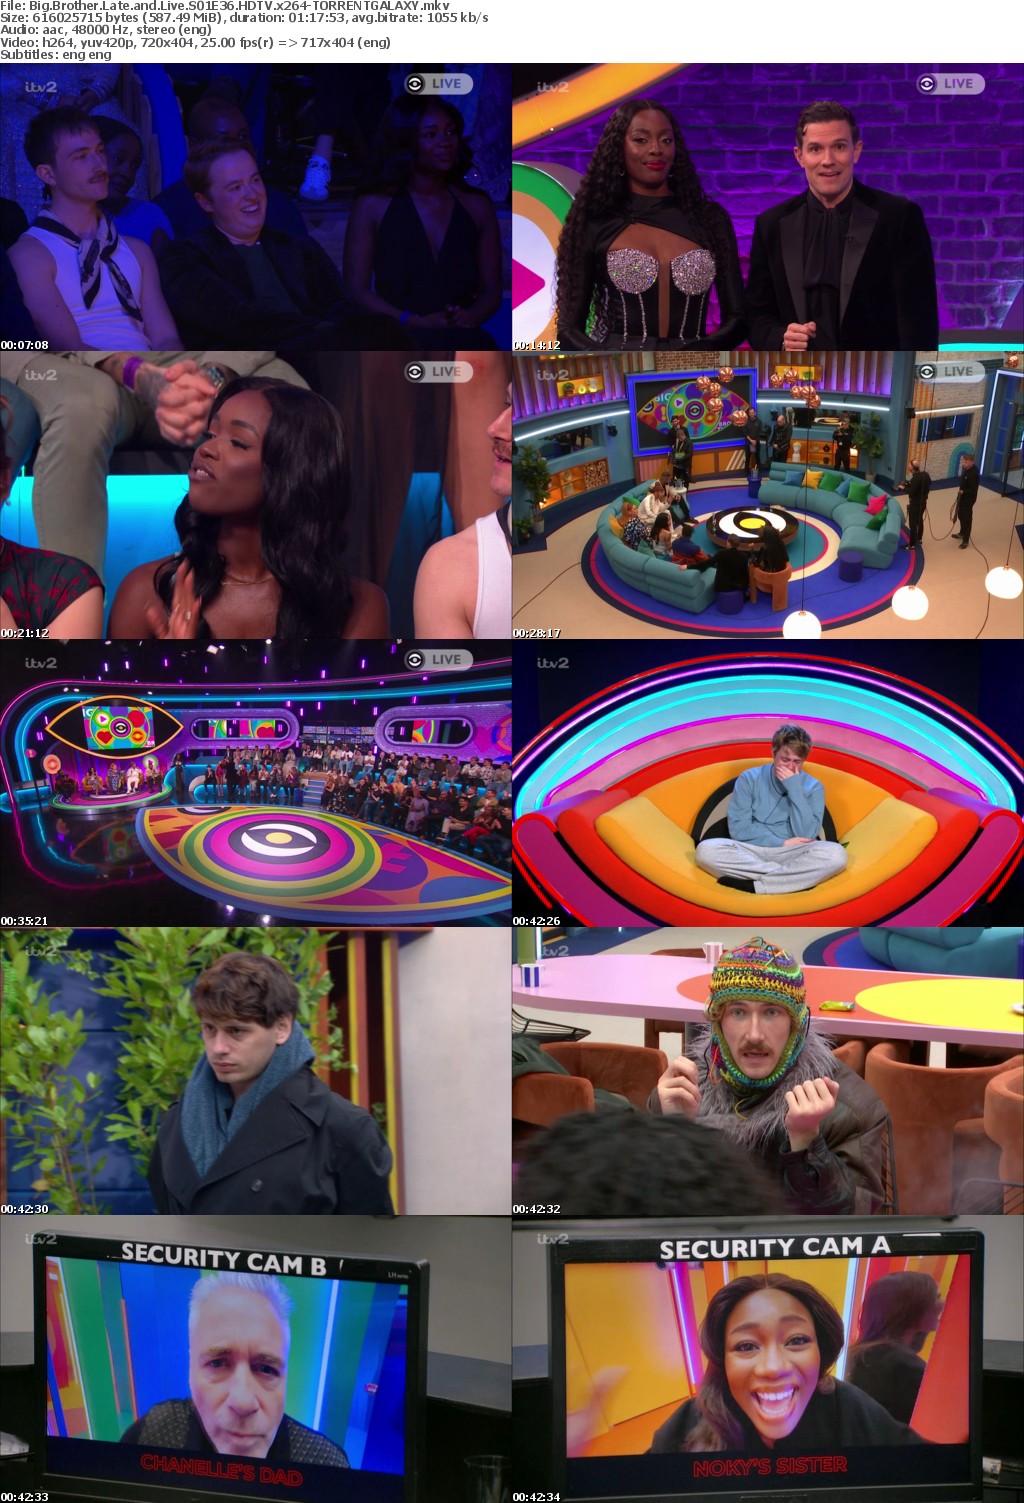 Big Brother Late and Live S01E36 HDTV x264-GALAXY